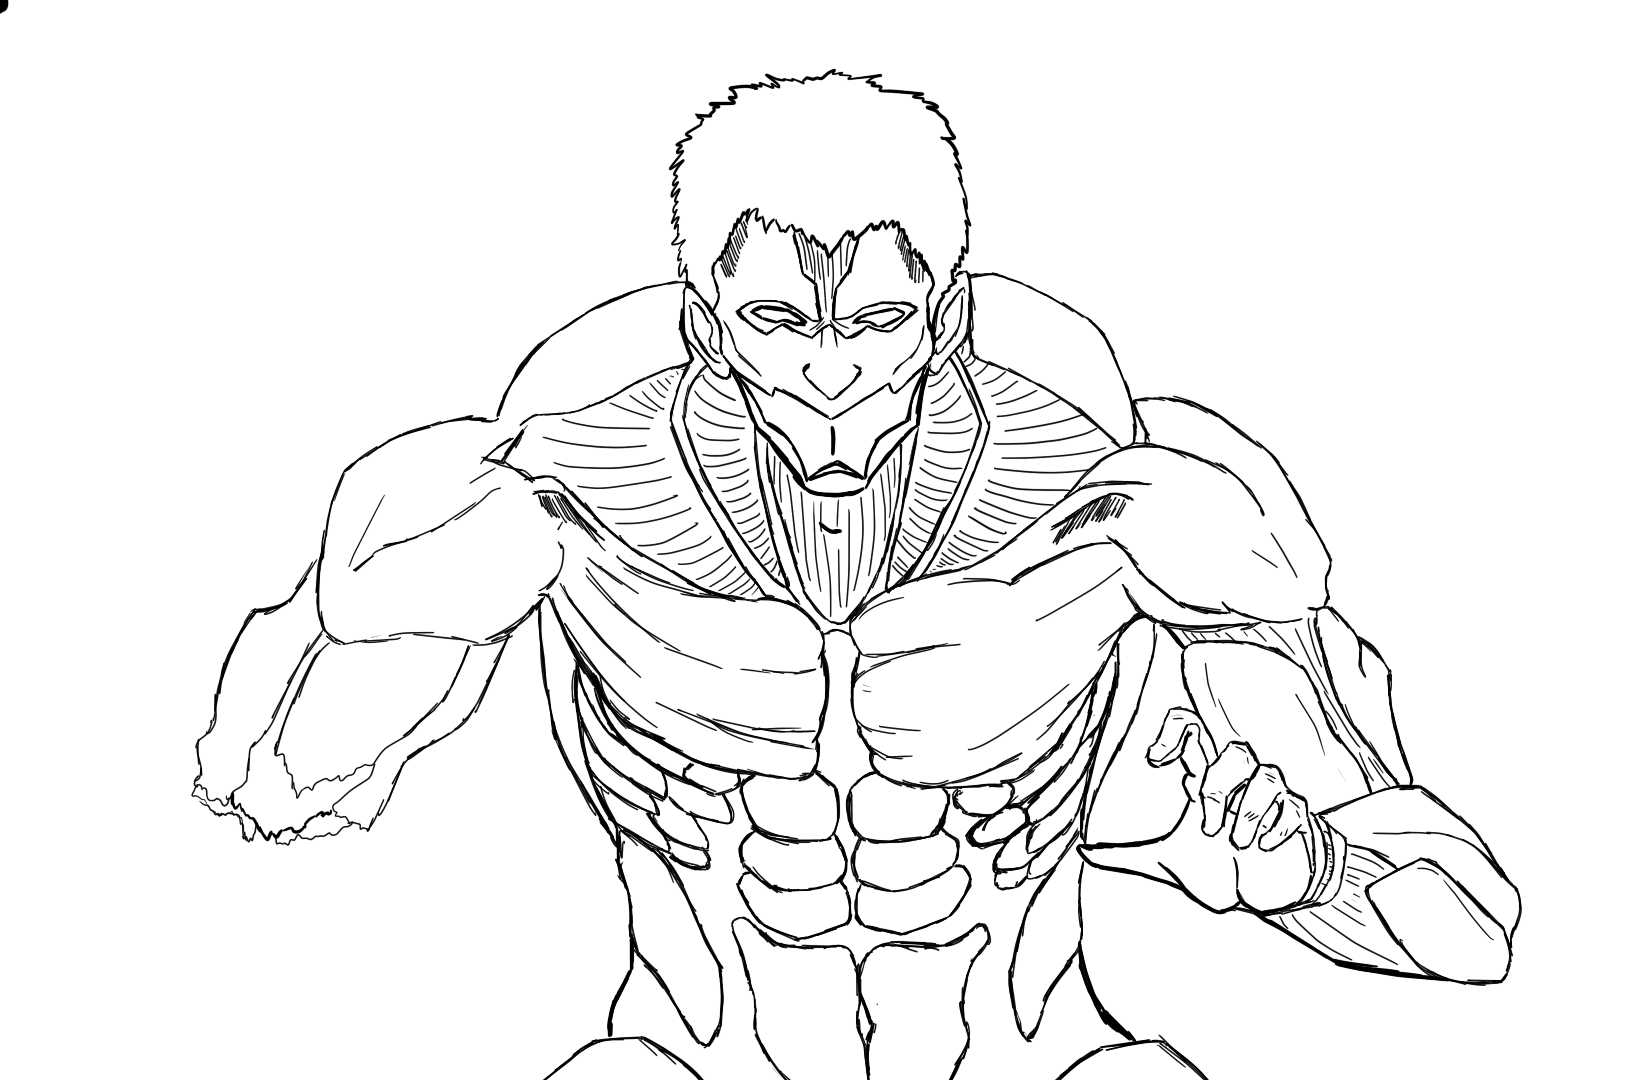 Blank Armored Titan drawing for coloring and editing. - Album on Imgur